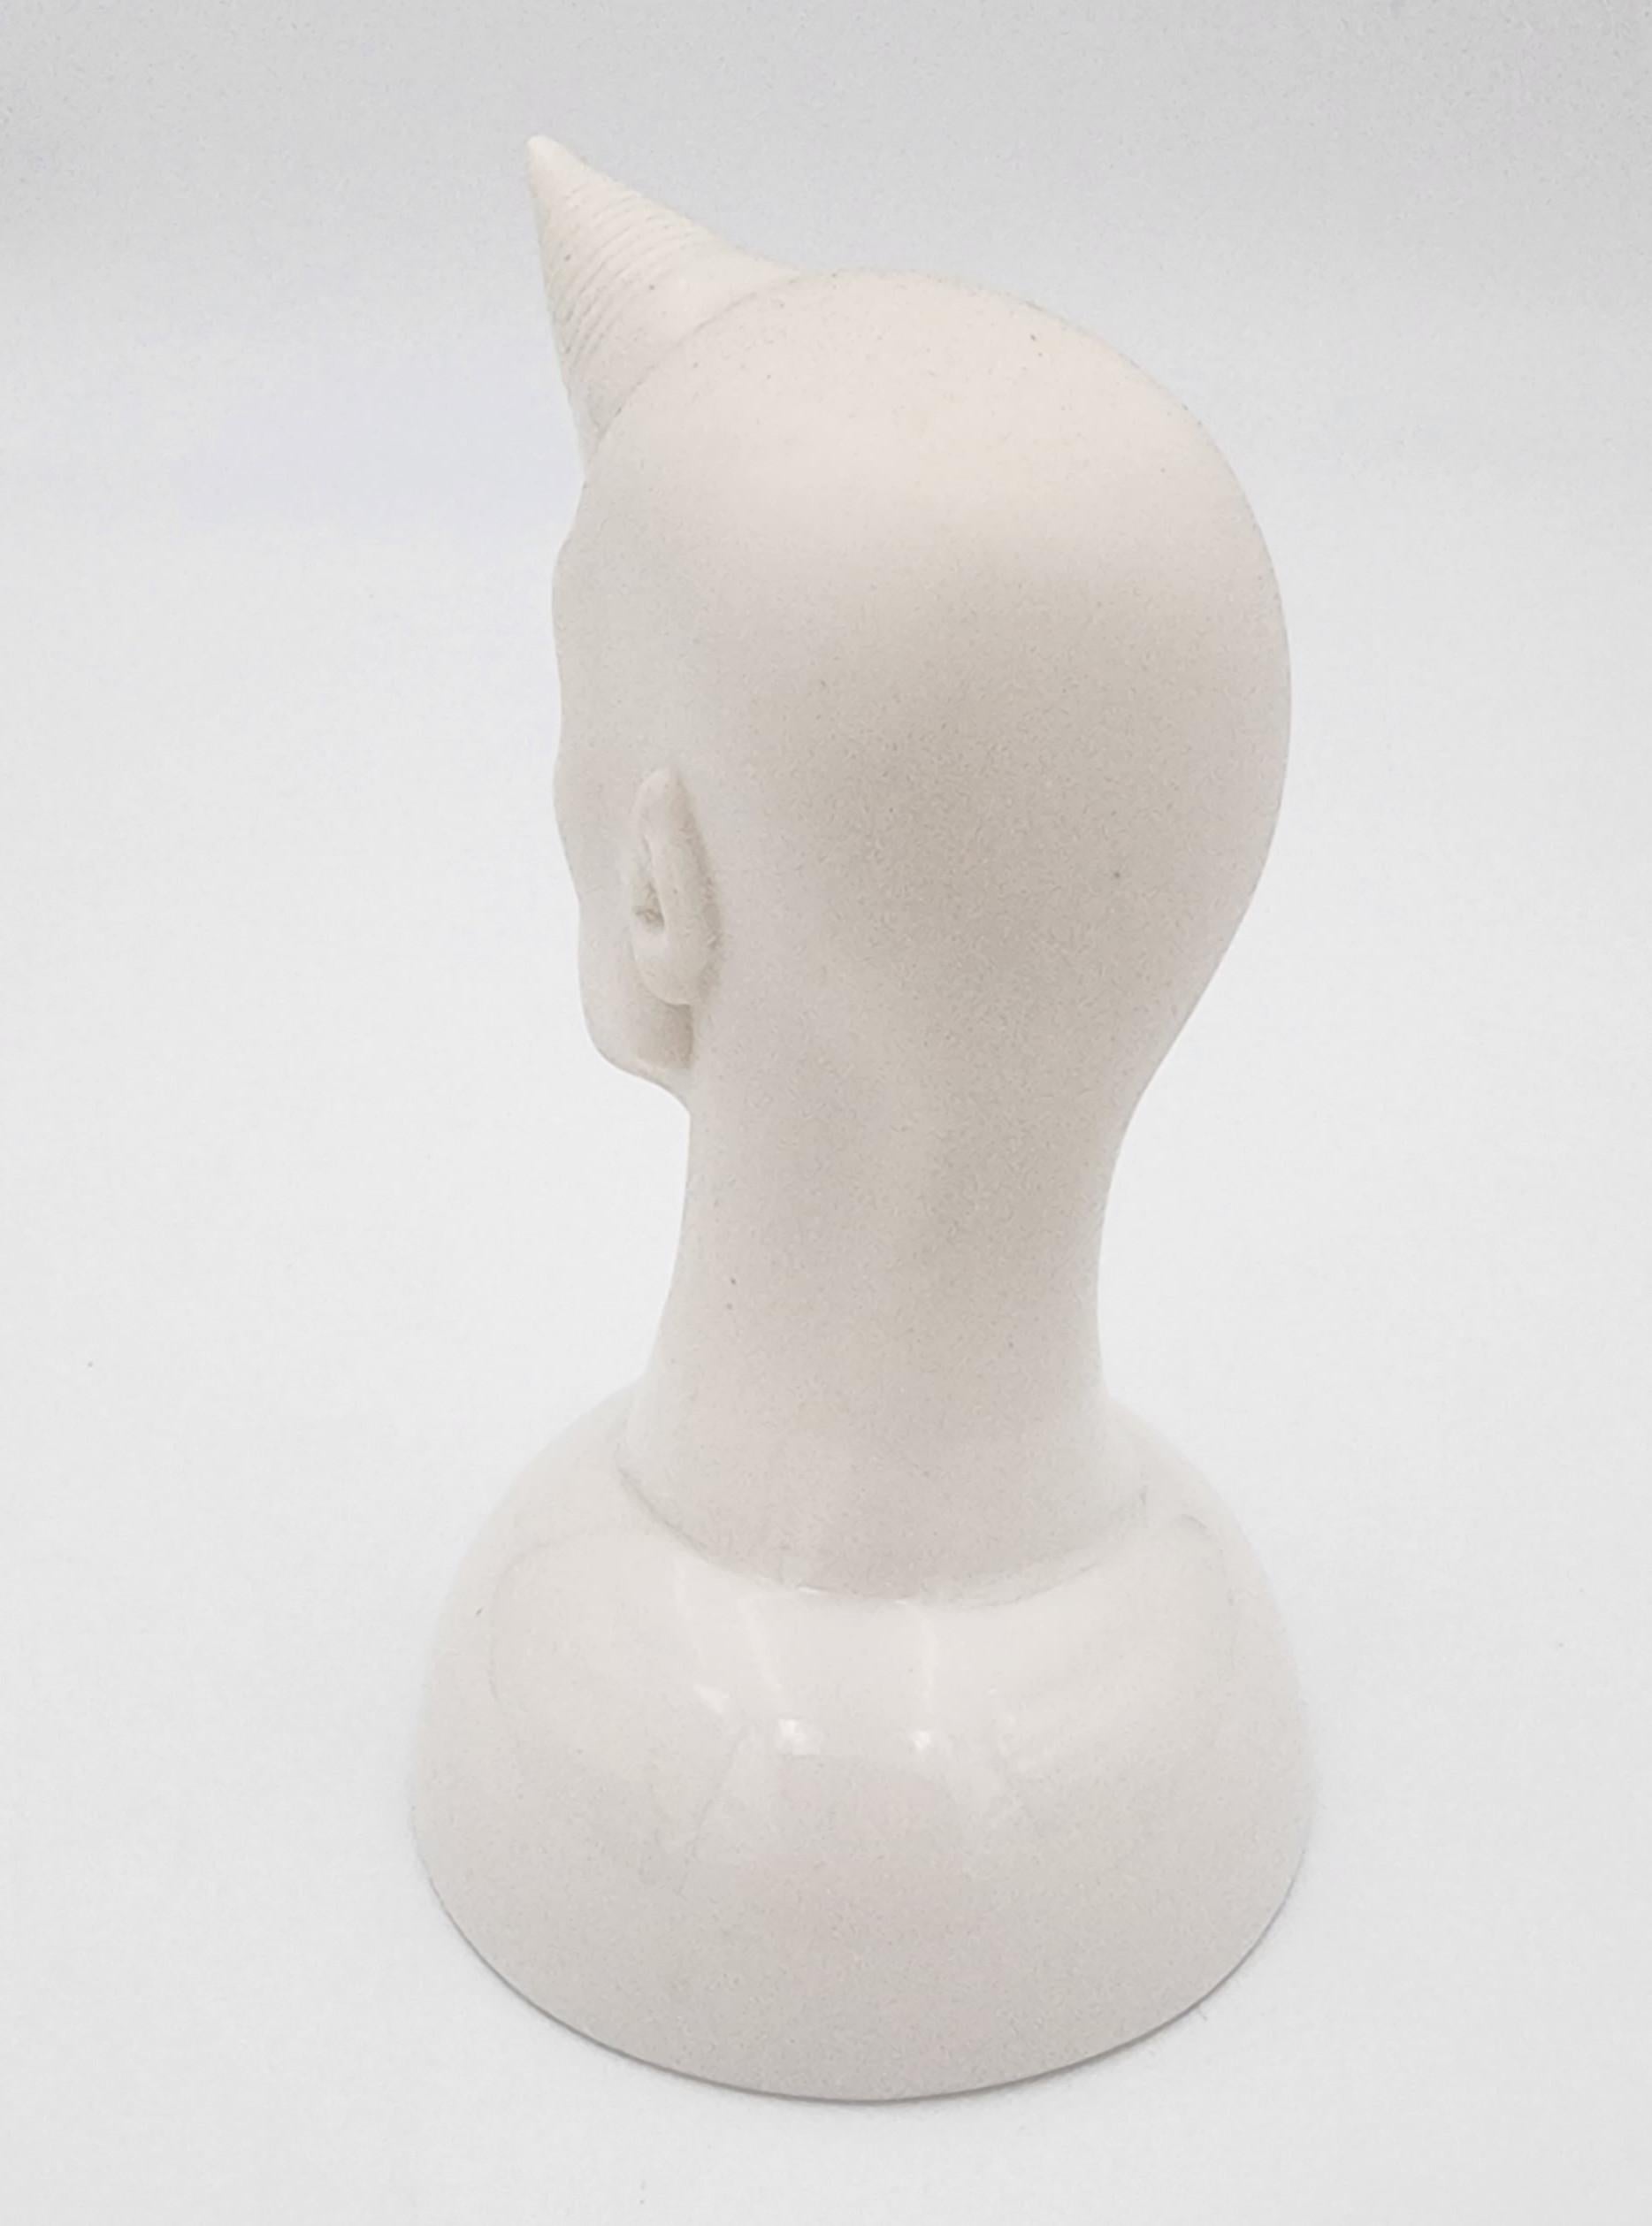 Male Head with Stylized Horn (Porcelain, Latvia, Sculpture, Smooth Texture) For Sale 2